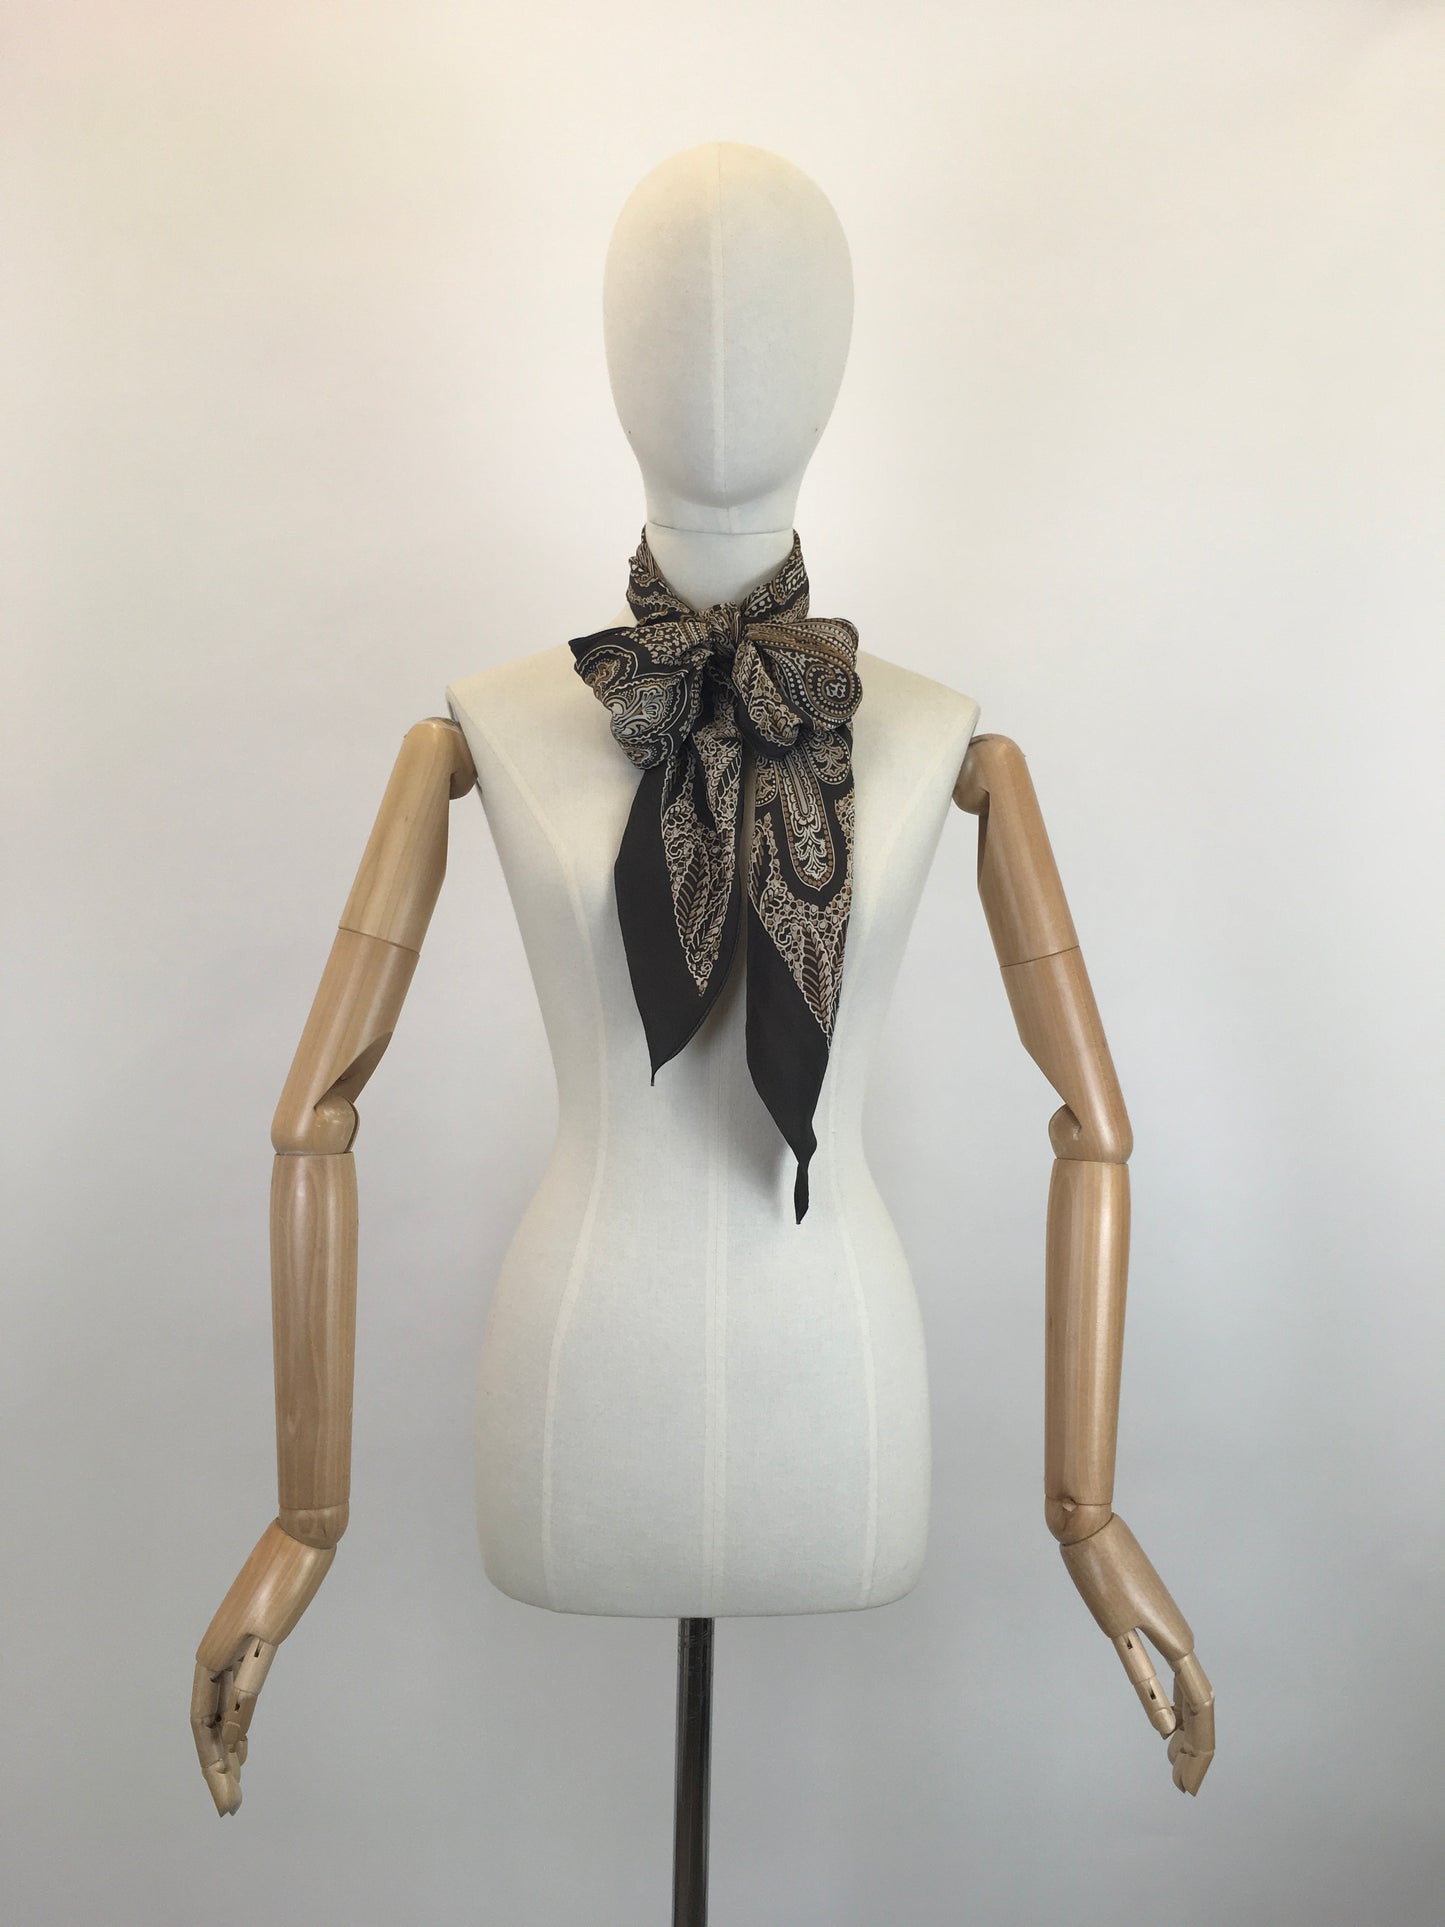 Original 1930’s Stunning Deco Pointed Scarf - In Warm Browns, Taupes and Mushrooms